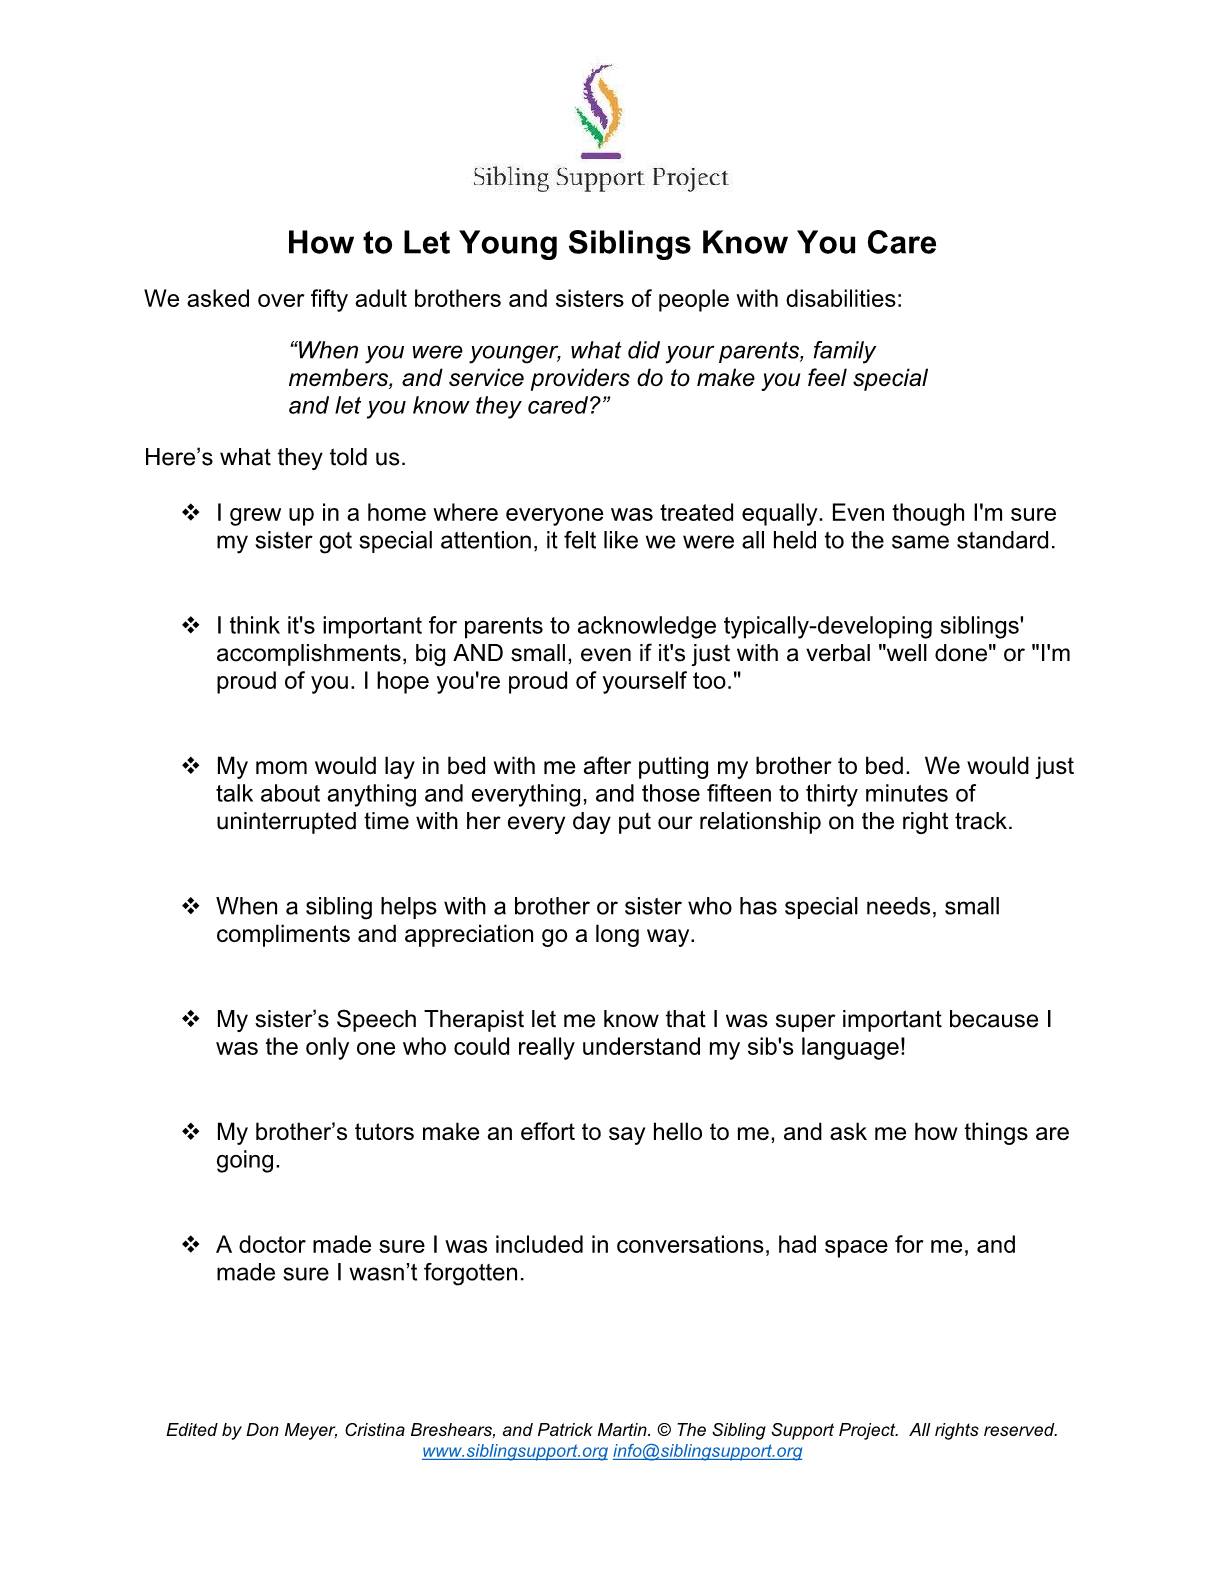 How To Let Young Siblings Know You Care